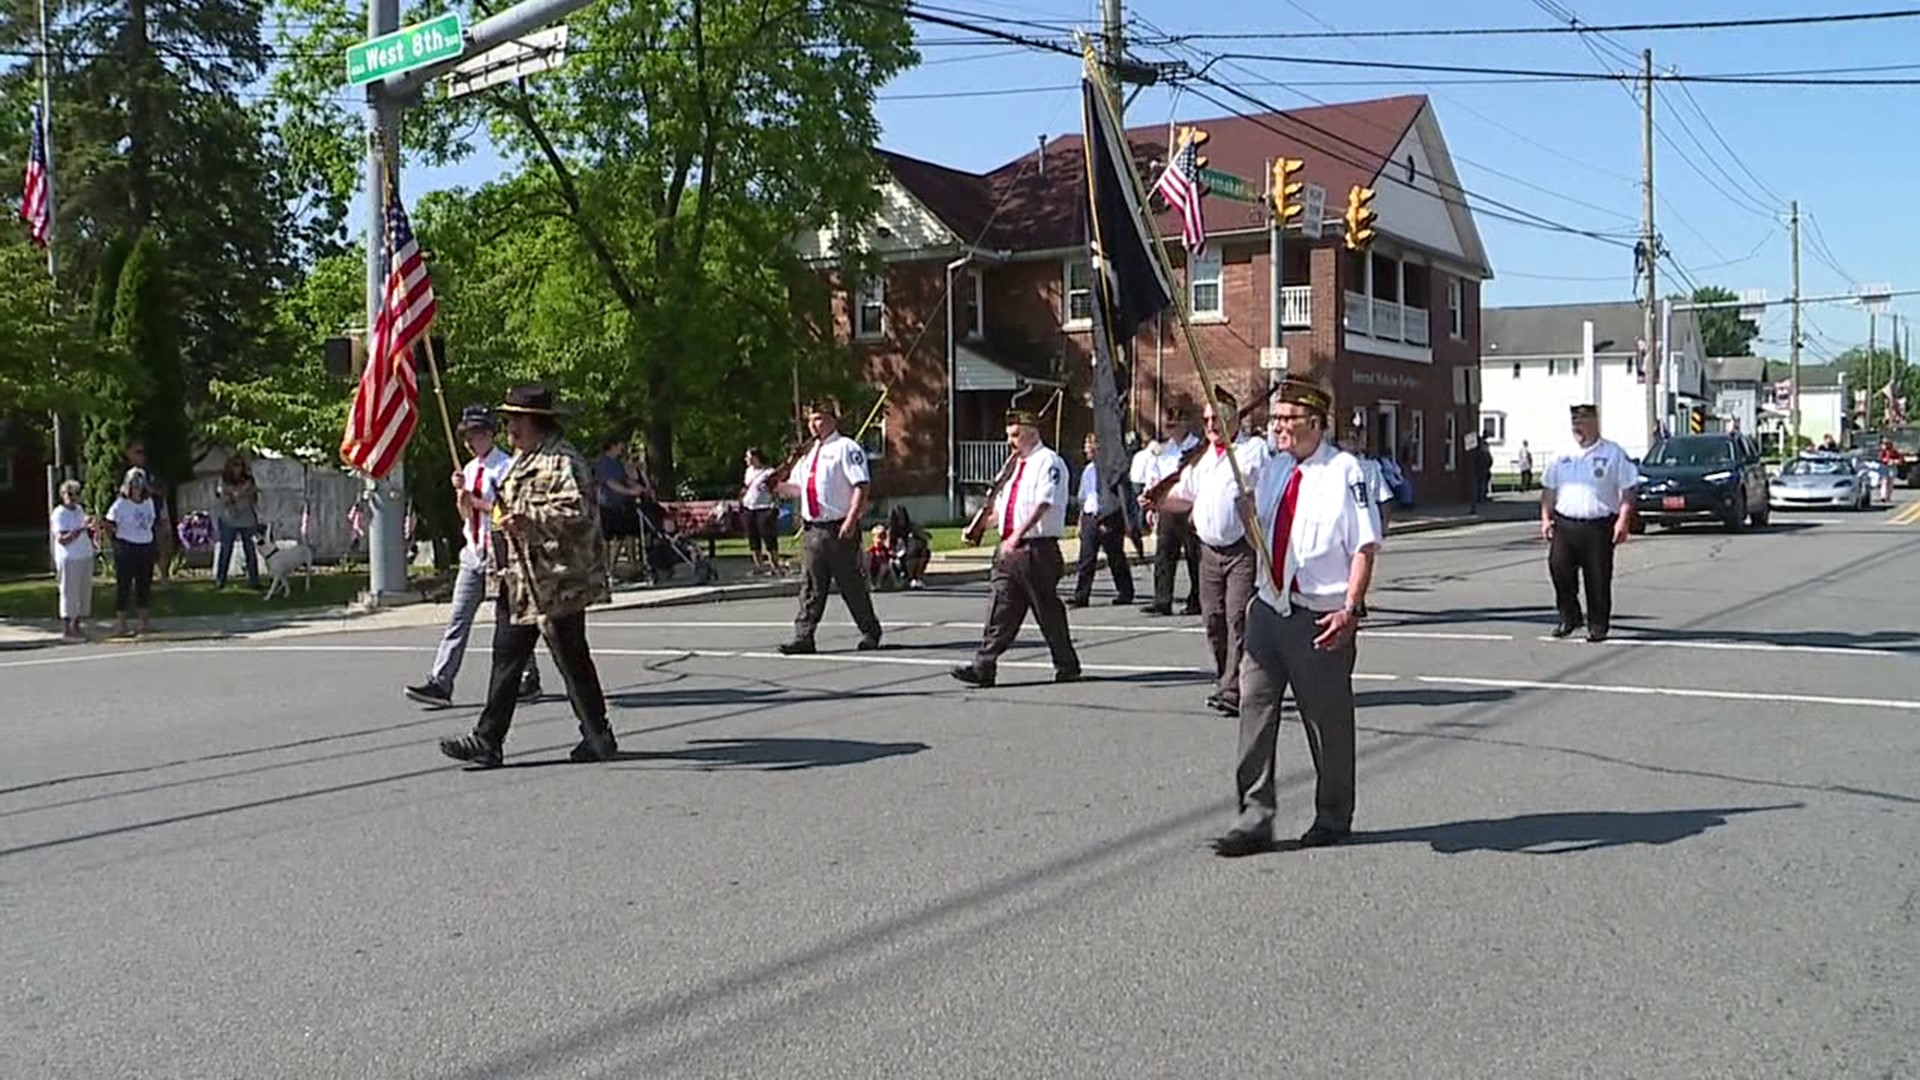 Communities throughout Northeastern and Central Pennsylvania paused Monday to observe Memorial Day and honor our fallen veterans.